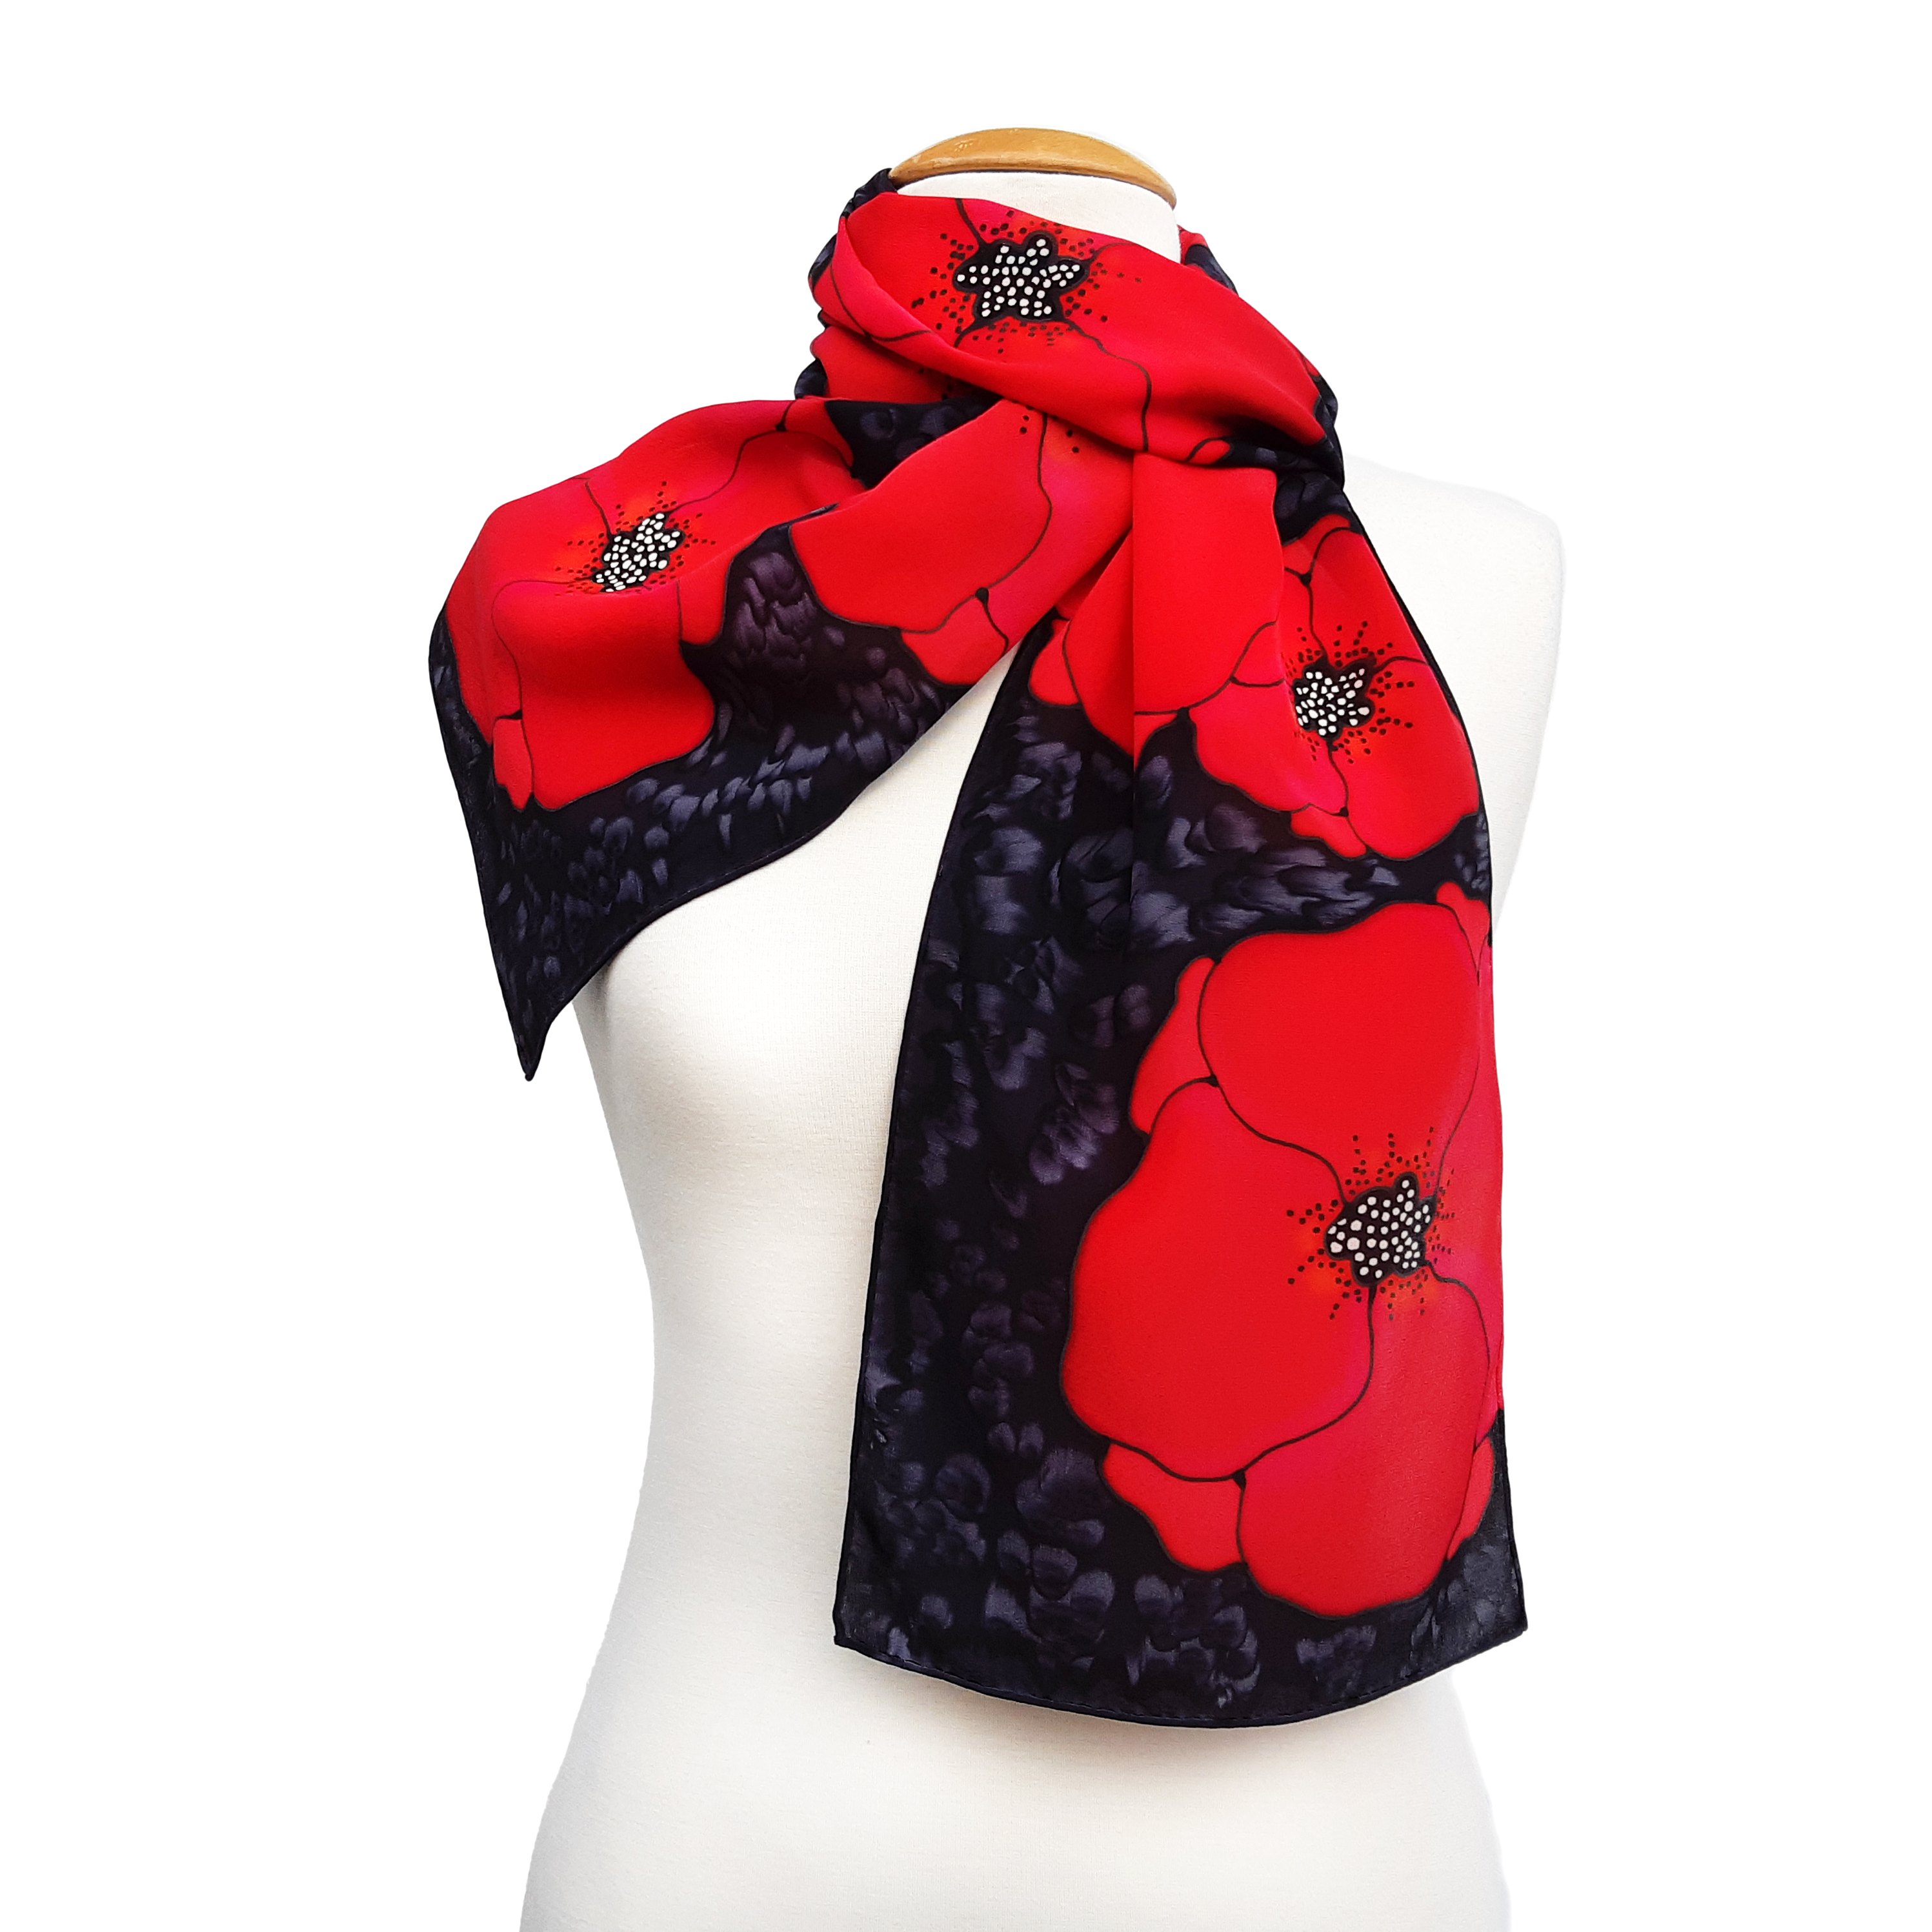 pure silk scarf hand painted red poppies on black silk crepe de chine hand made by Lynne Kiel